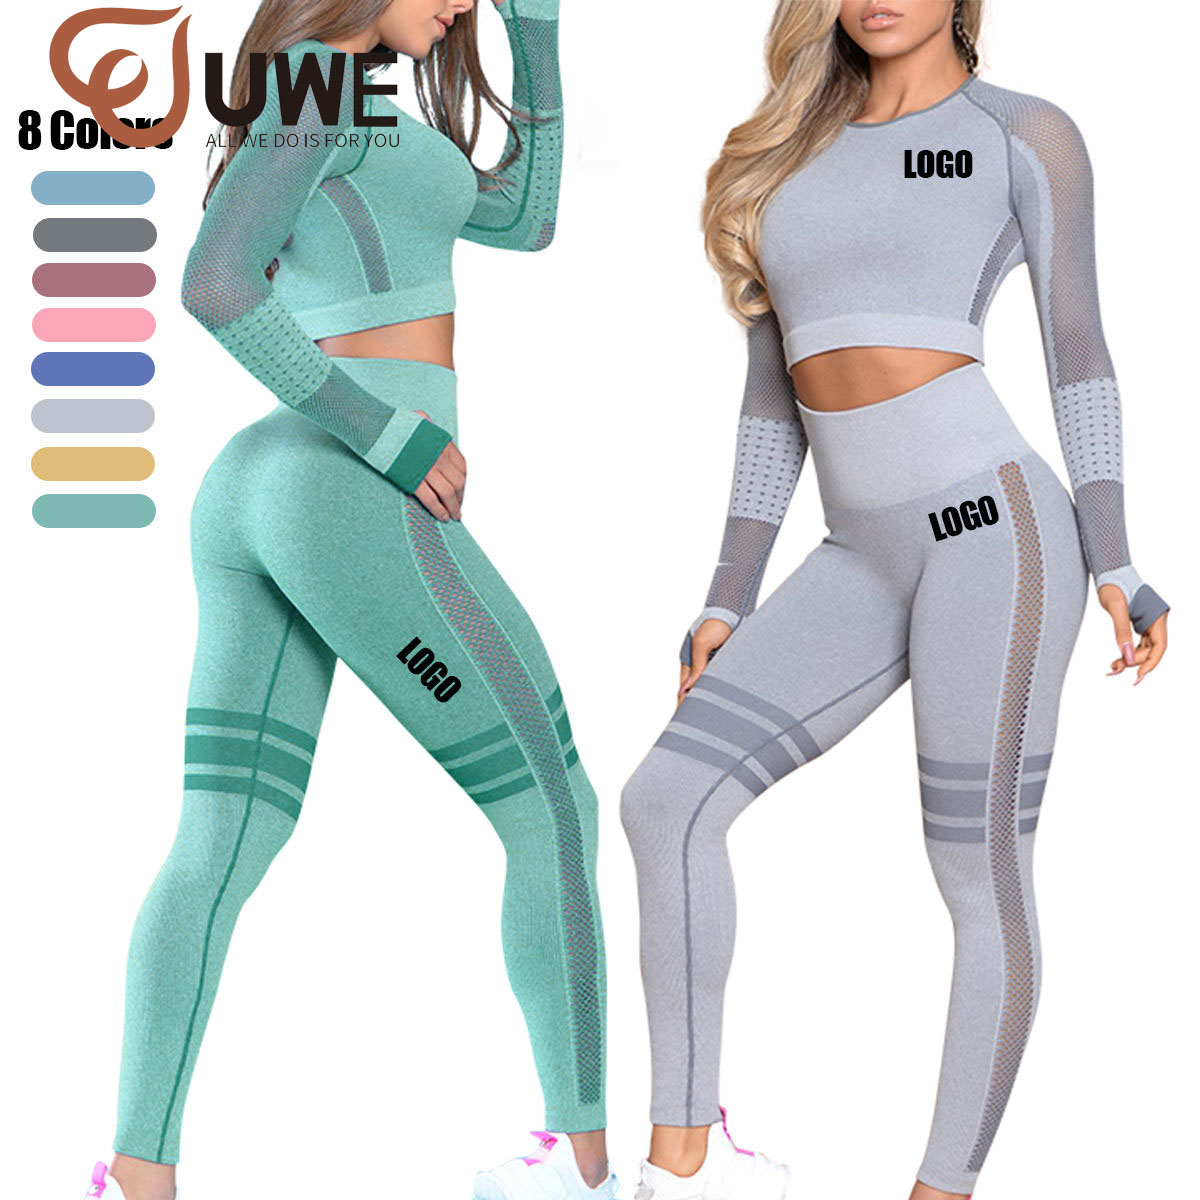 Top Gym Wear Supplier for High-Quality Fitness Apparel